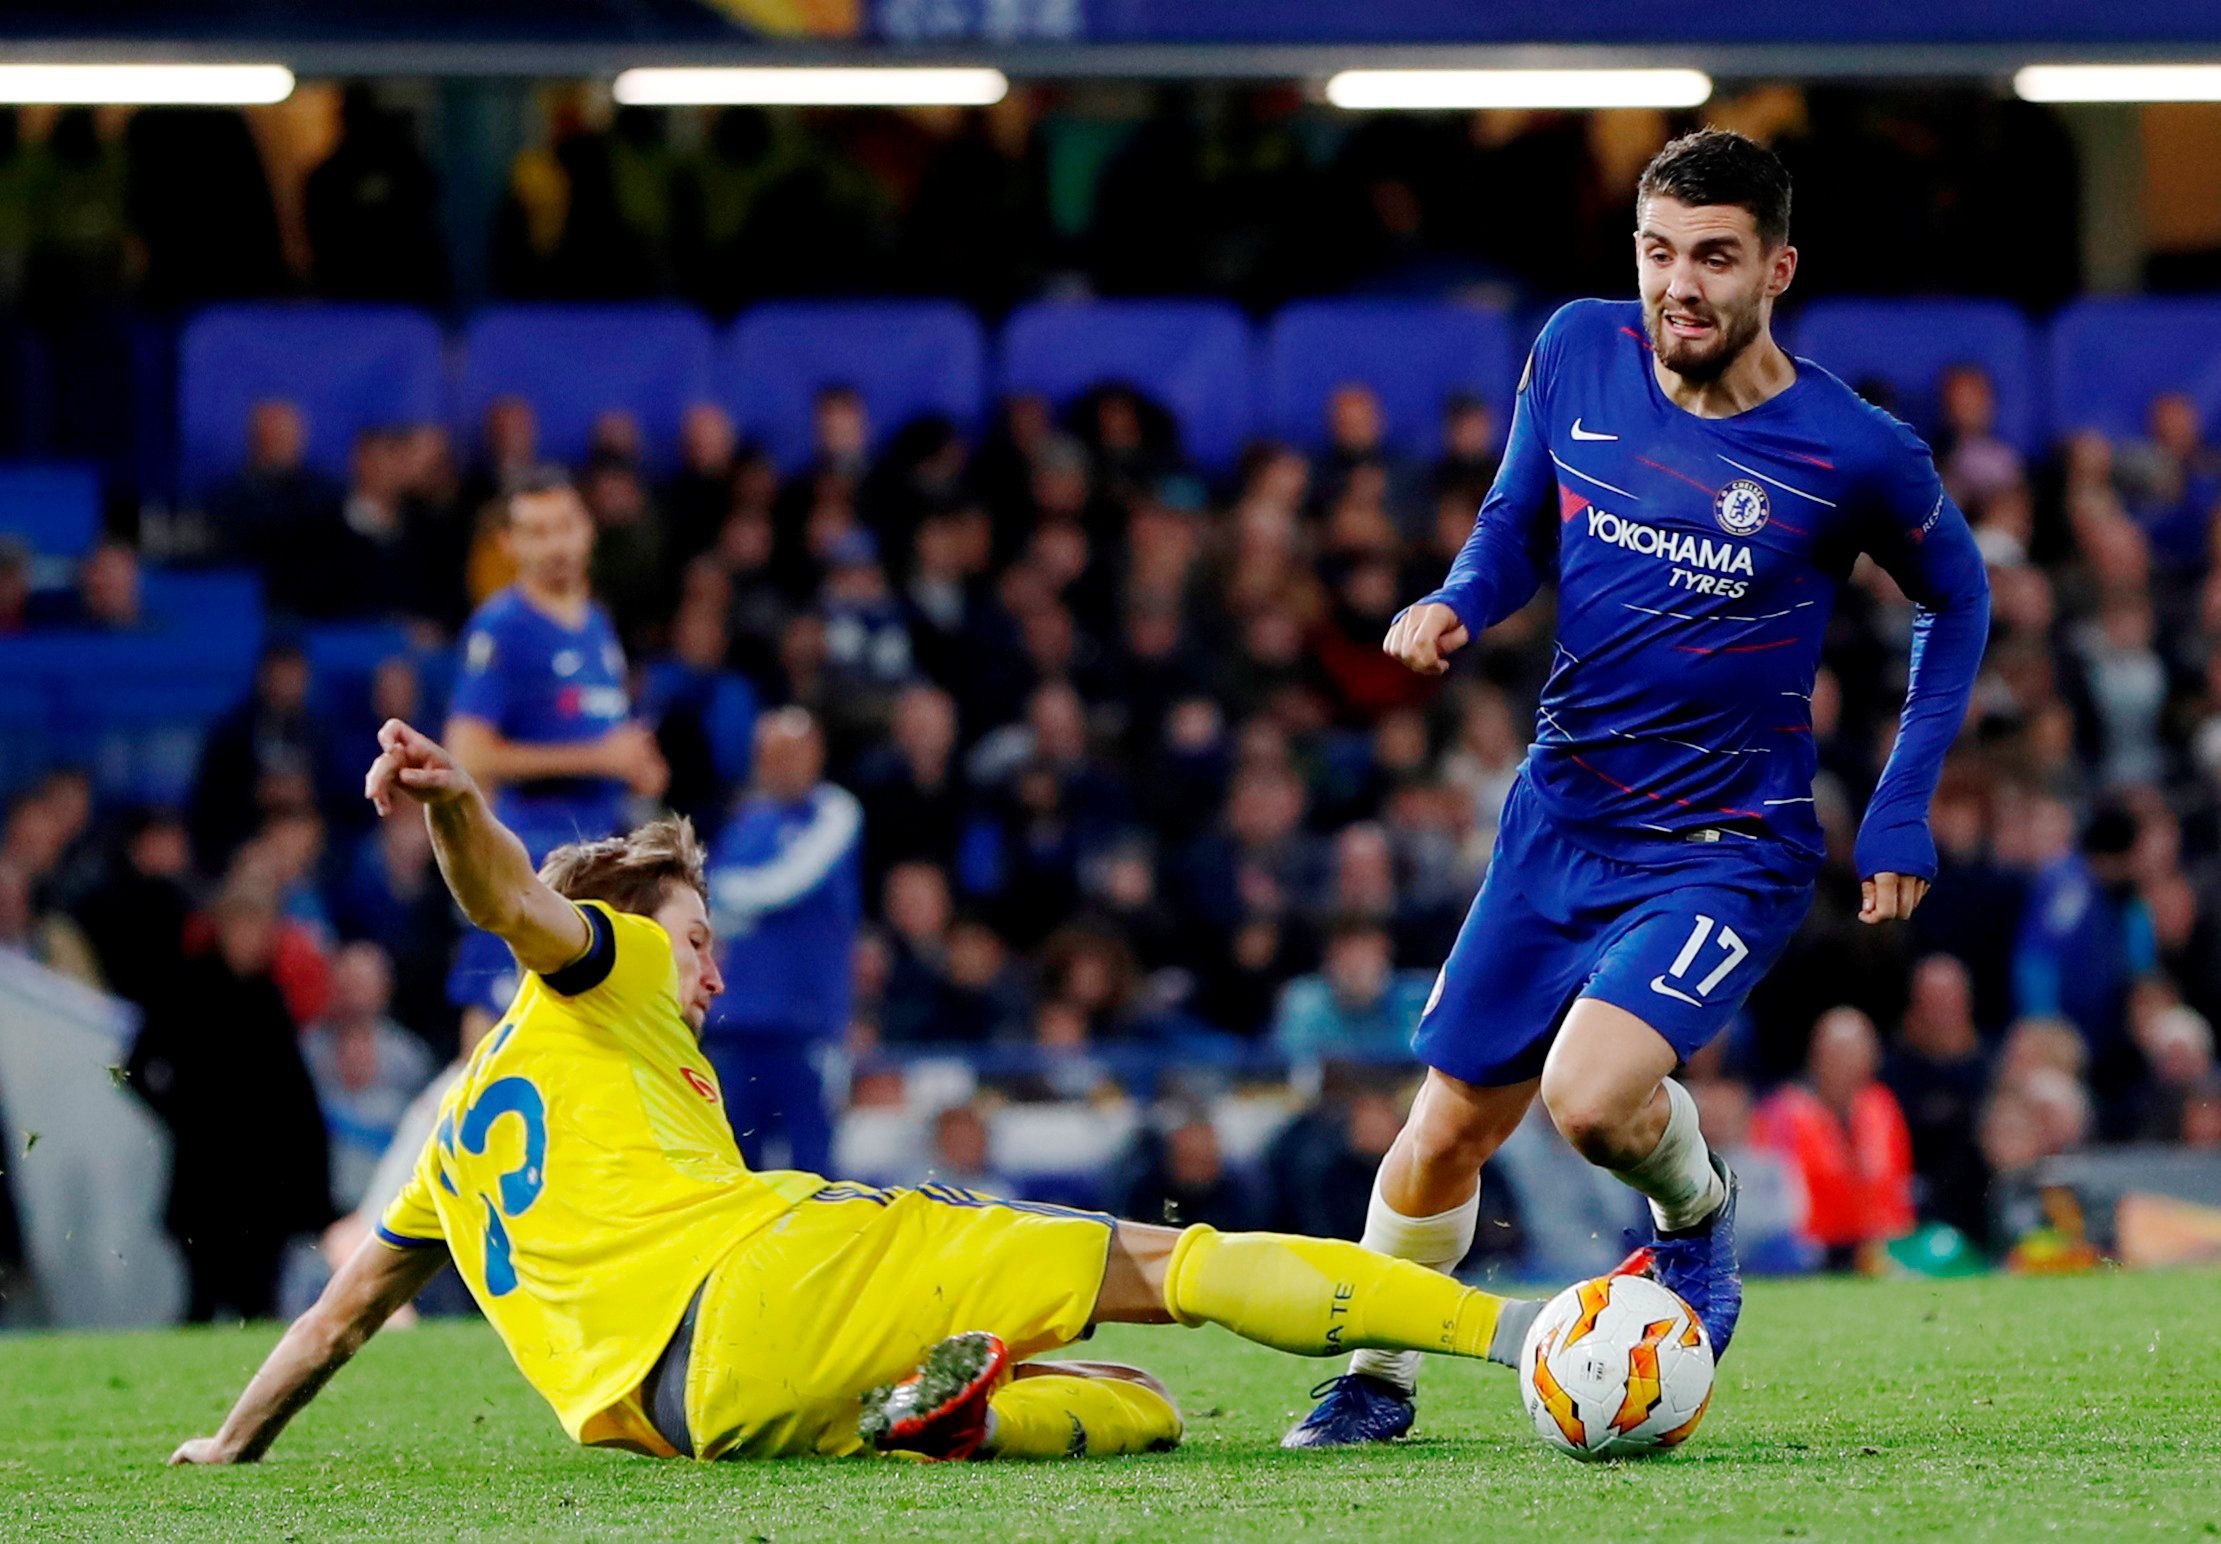 Soccer Football - Europa League - Group Stage - Group L - Chelsea v BATE Borisov - Stamford Bridge, London, Britain - October 25, 2018  Chelsea's Mateo Kovacic in action with BATE Borisov's Dmitri Baga   Action Images via Reuters/Paul Childs